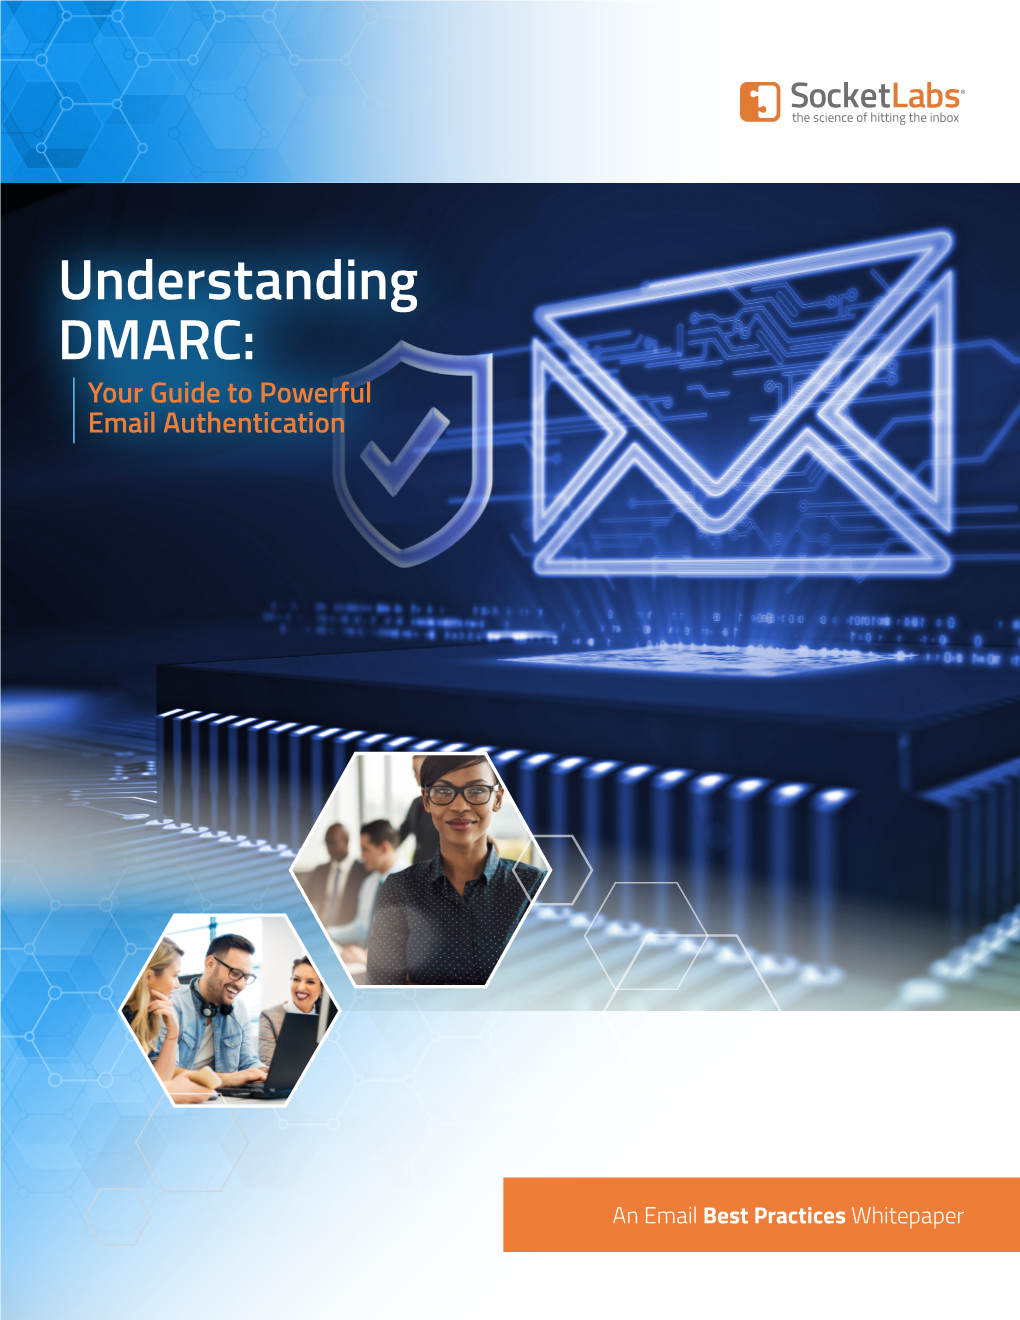 Understanding DMARC: Your Guide to Powerful Email Authentication